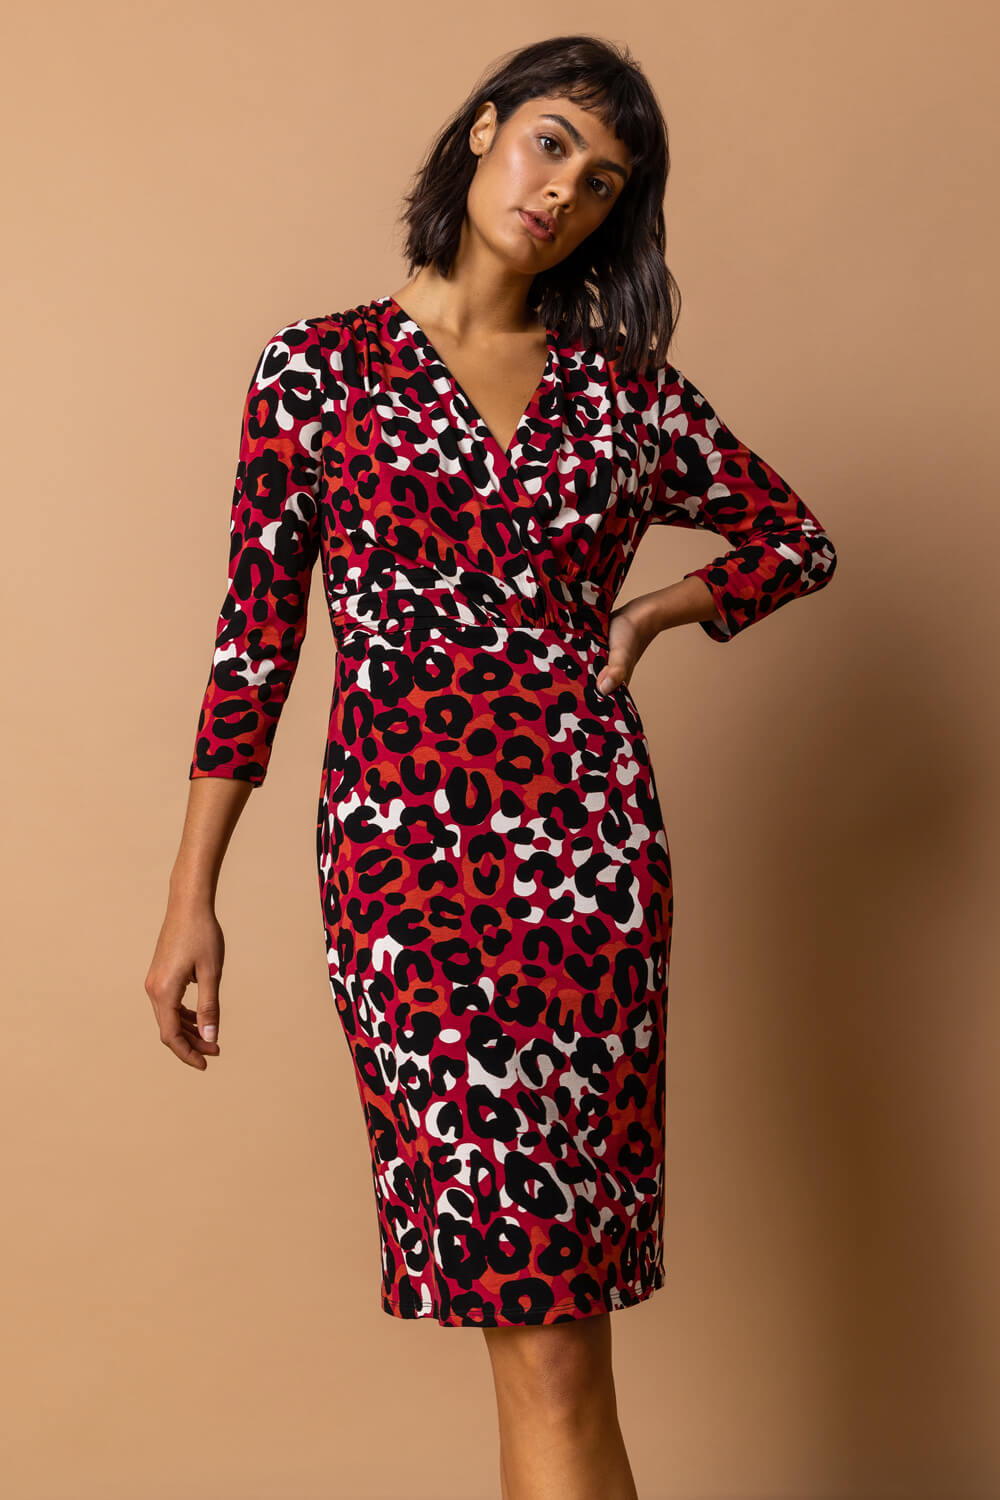 Copper Animal Print Fitted Wrap Dress, Image 3 of 4